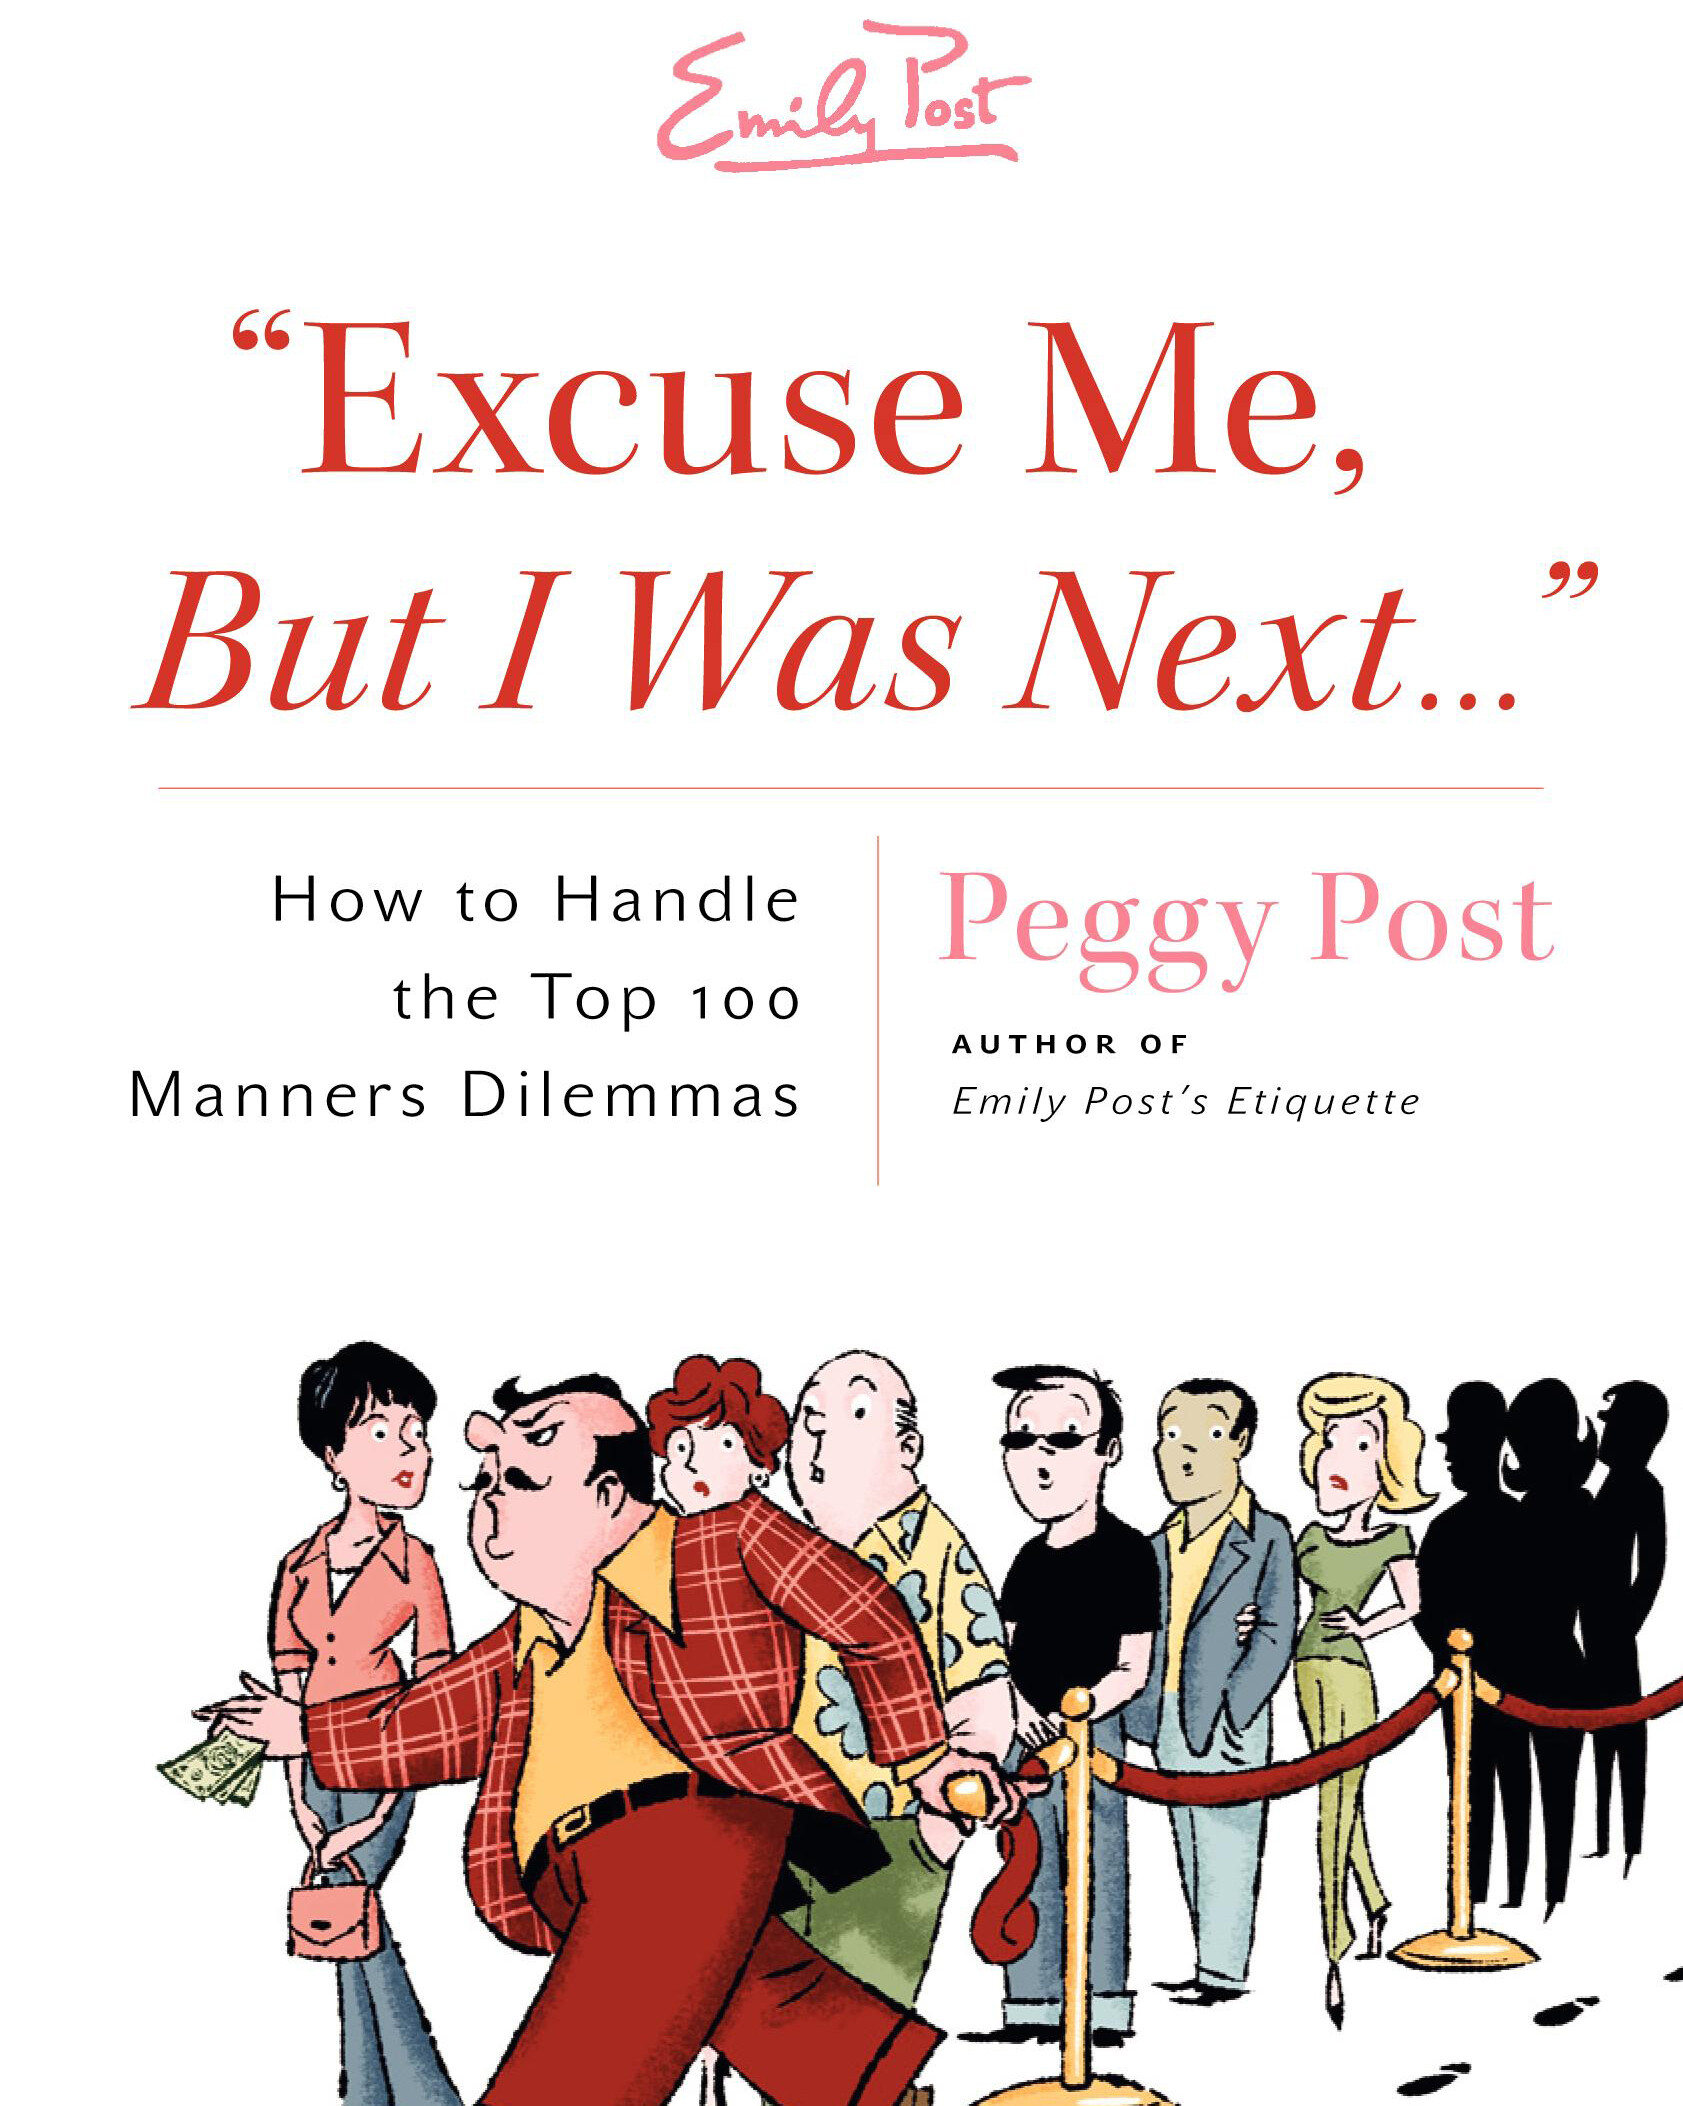 cover image of Emily POst's Excuse Me But I was Next showing title over an illustration of someone cutting a rope line while those standing in line watch in disbelief